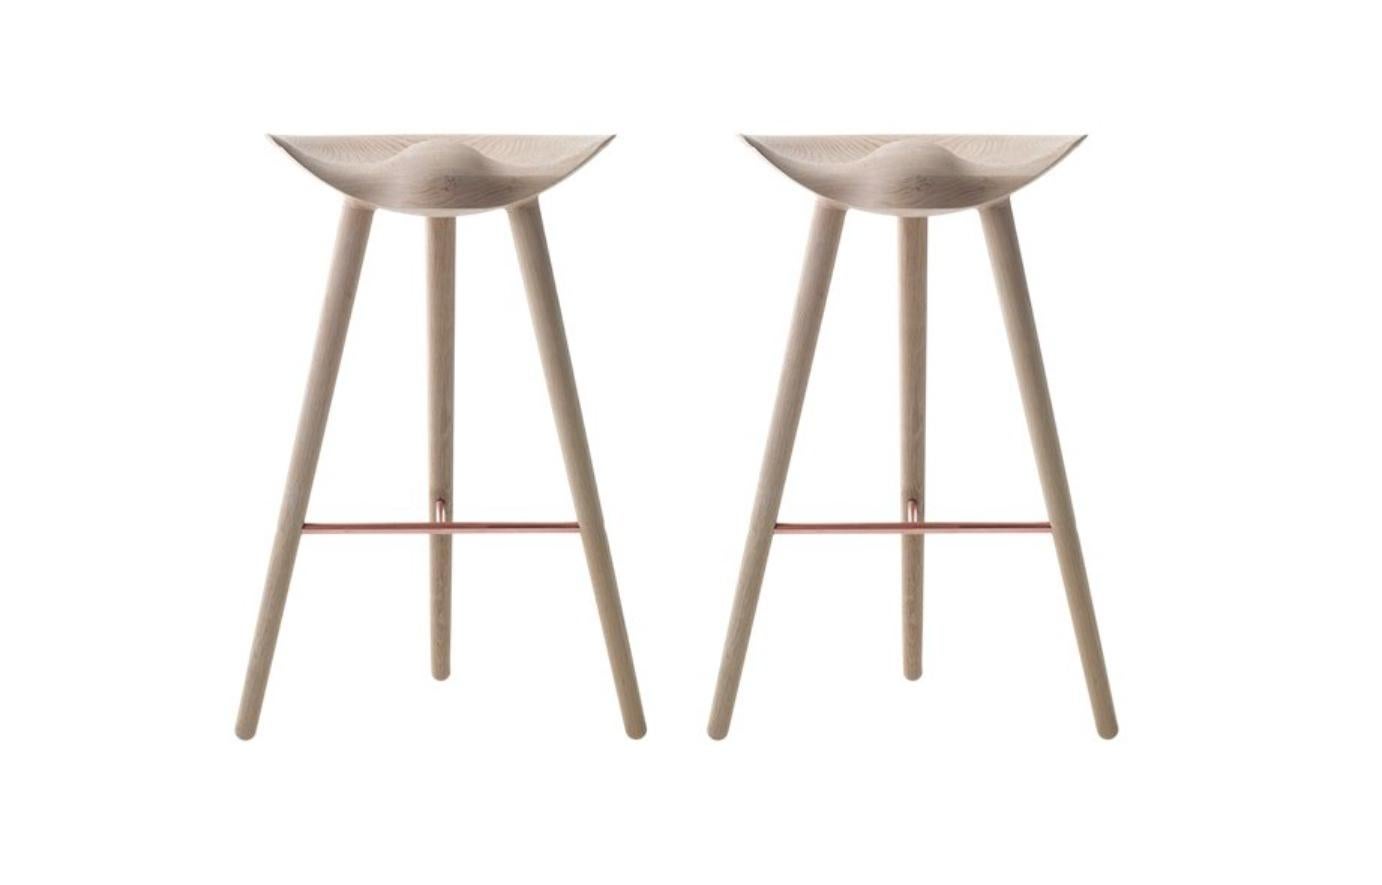 Set of 2 oak and copper bar stools by Lassen
Dimensions: H 77 x W 36 x L 55.5 cm
Materials: oak, copper

In 1942 Mogens Lassen designed the Stool ML42 as a piece for a furniture exhibition held at the Danish Museum of Decorative Art. He took